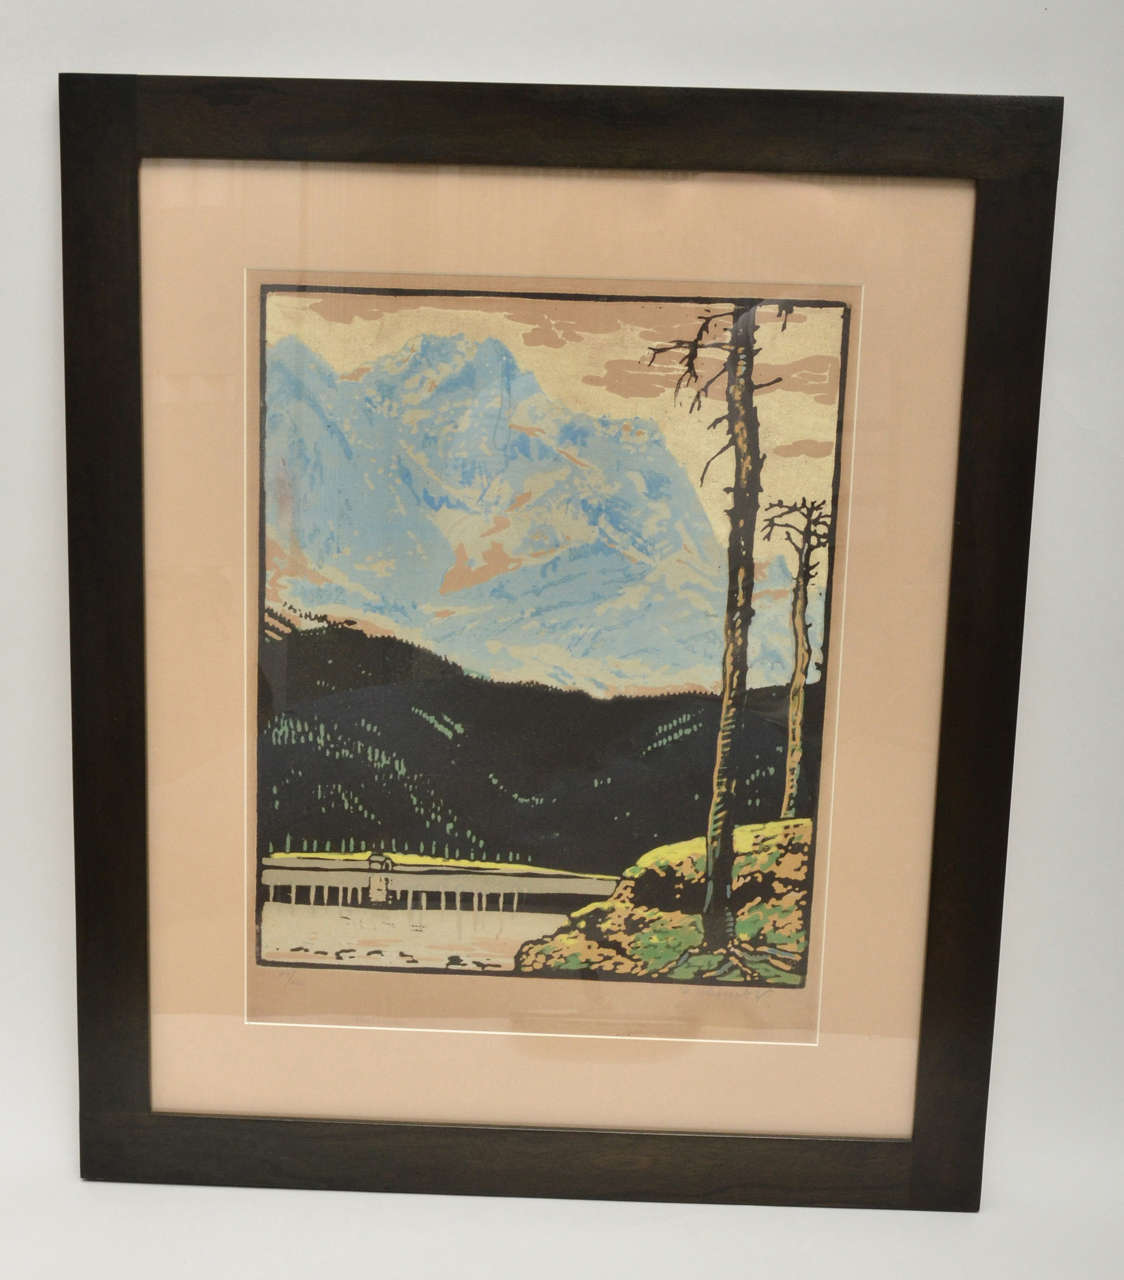 Fine Color Woodblock (80/100) Image of Mountains with Waterfalls.  Possibly the Cascades.  Bold Image on Tan Stock.  American, Circa 1915.  Signed in pencil, lower right - signature unknown to me.  Conservation mat and Doweled Frame.